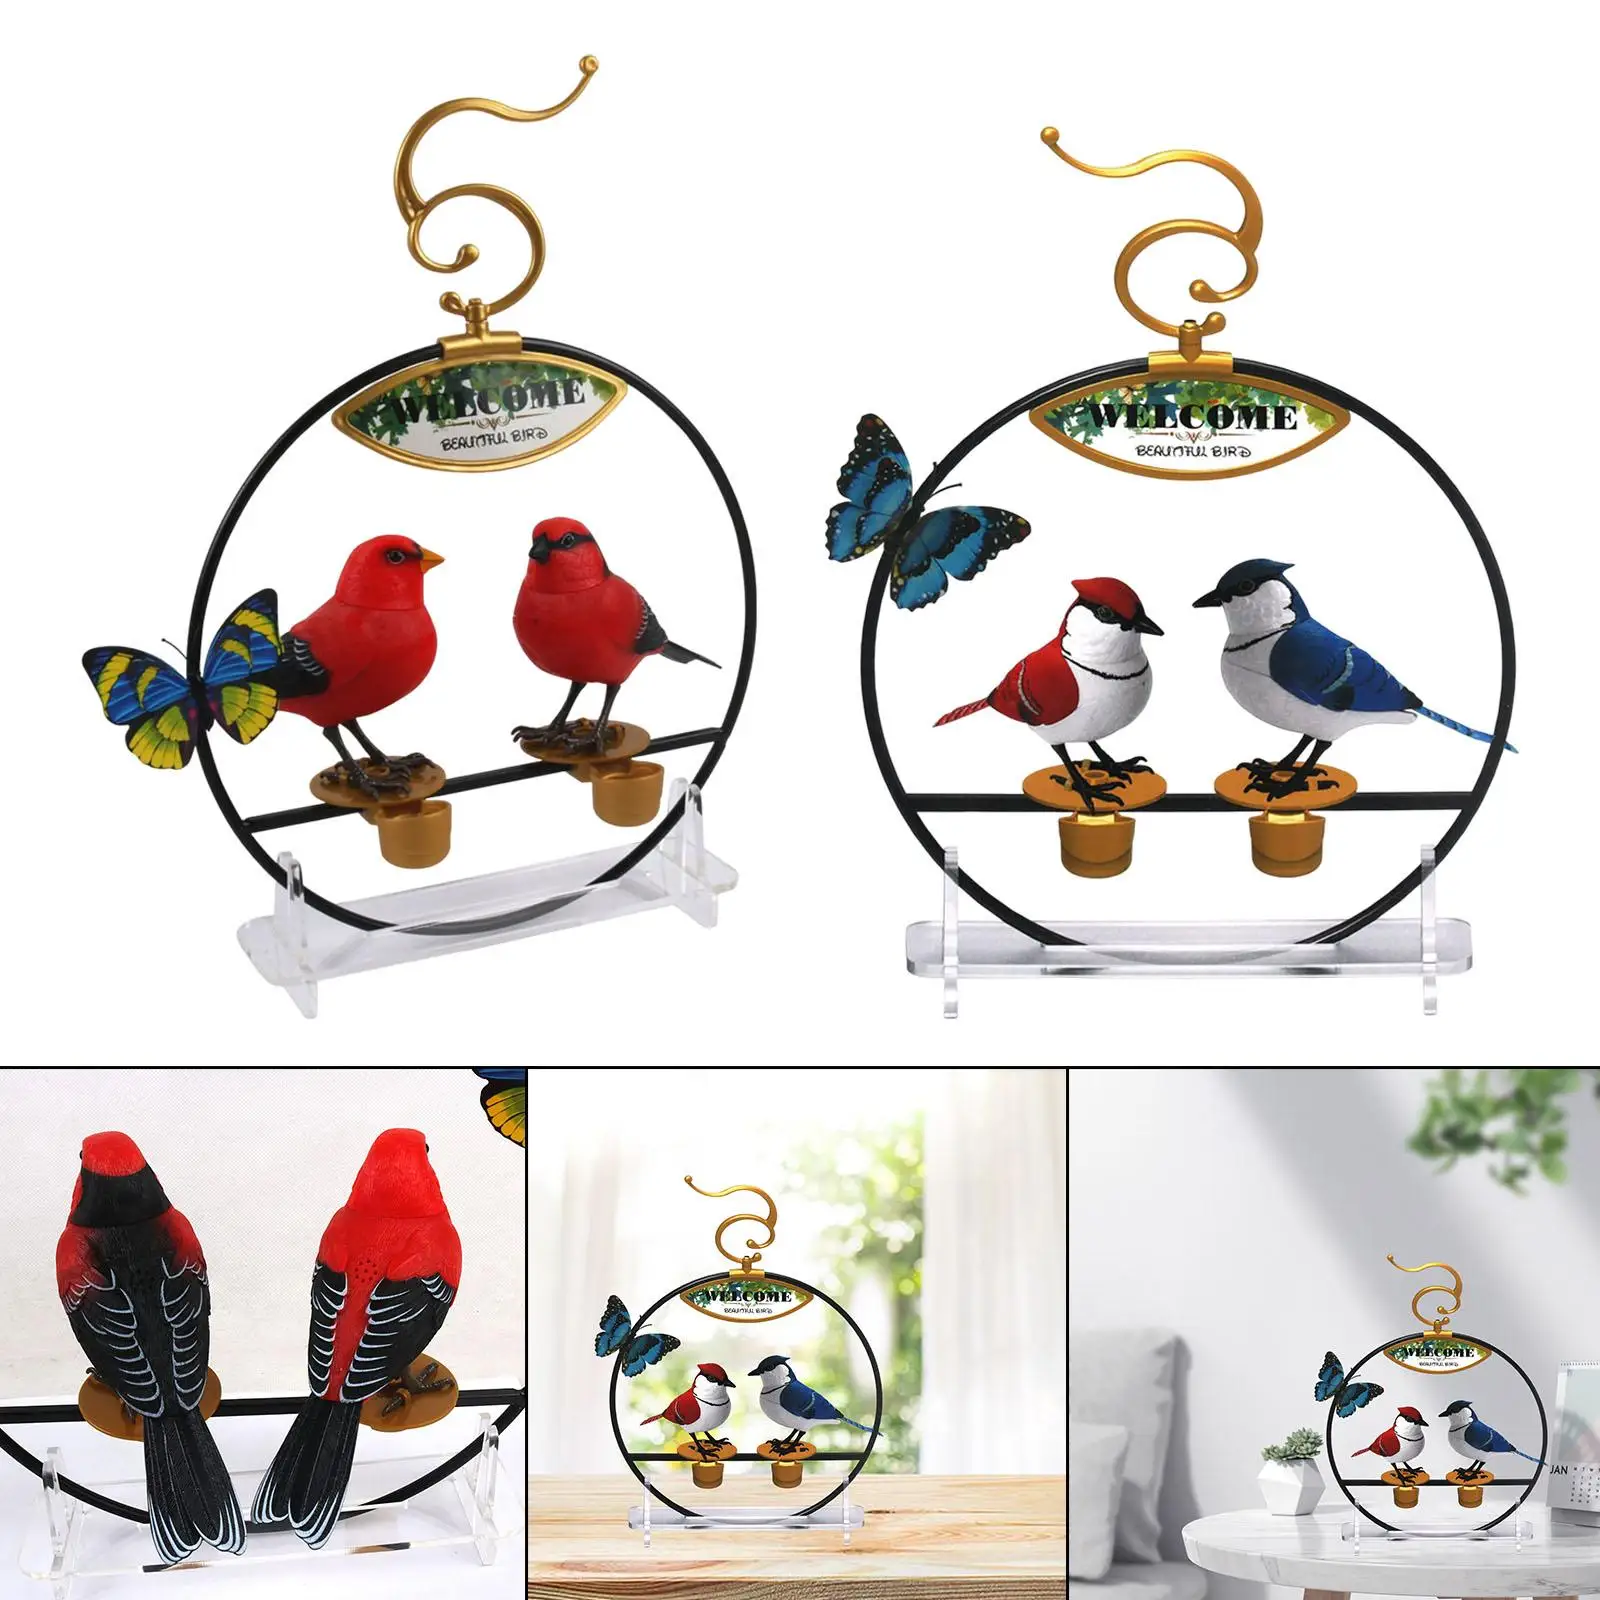 Cute Chirping Dancing Parrots Bird Battery Powered with Voice Sensor Sound Activated Chirping Bird Kids Toy Gift Home Decoration